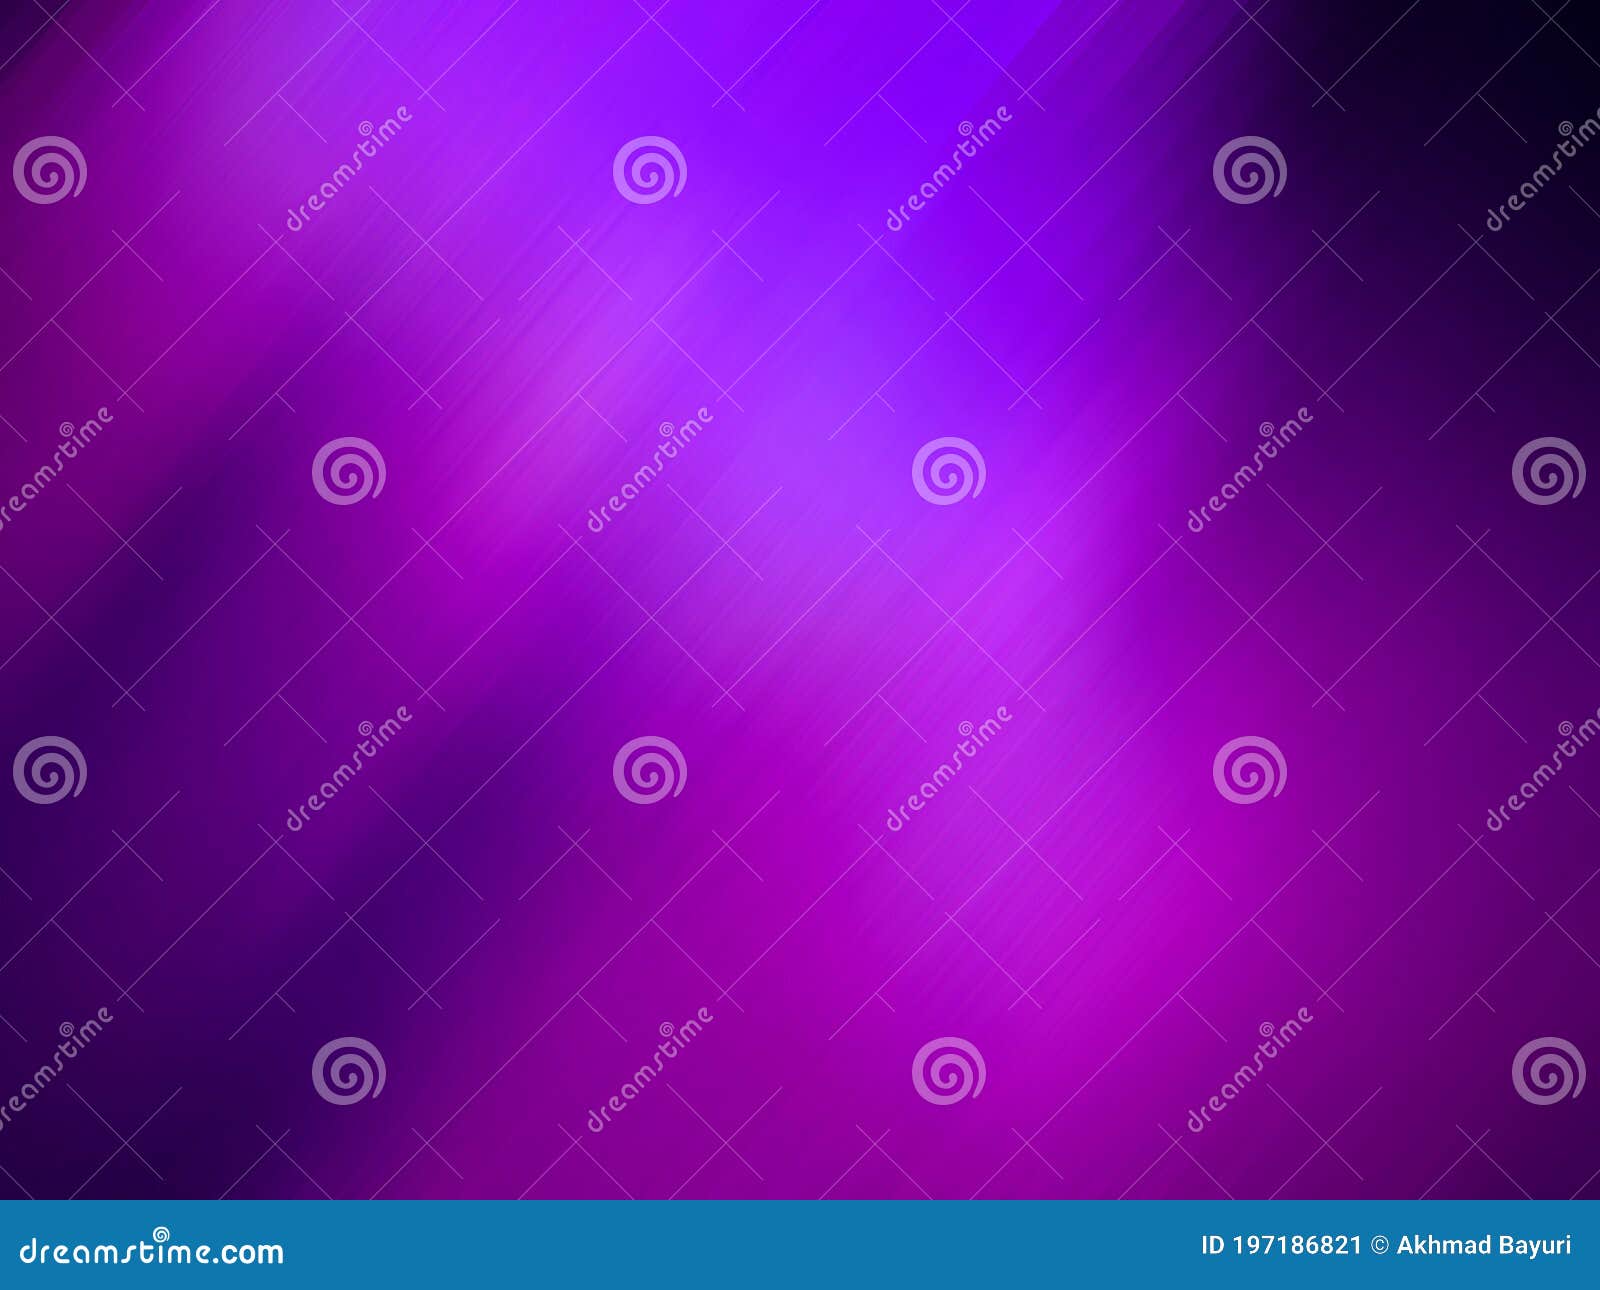 colorful blurry background with a predominance of blue and purple